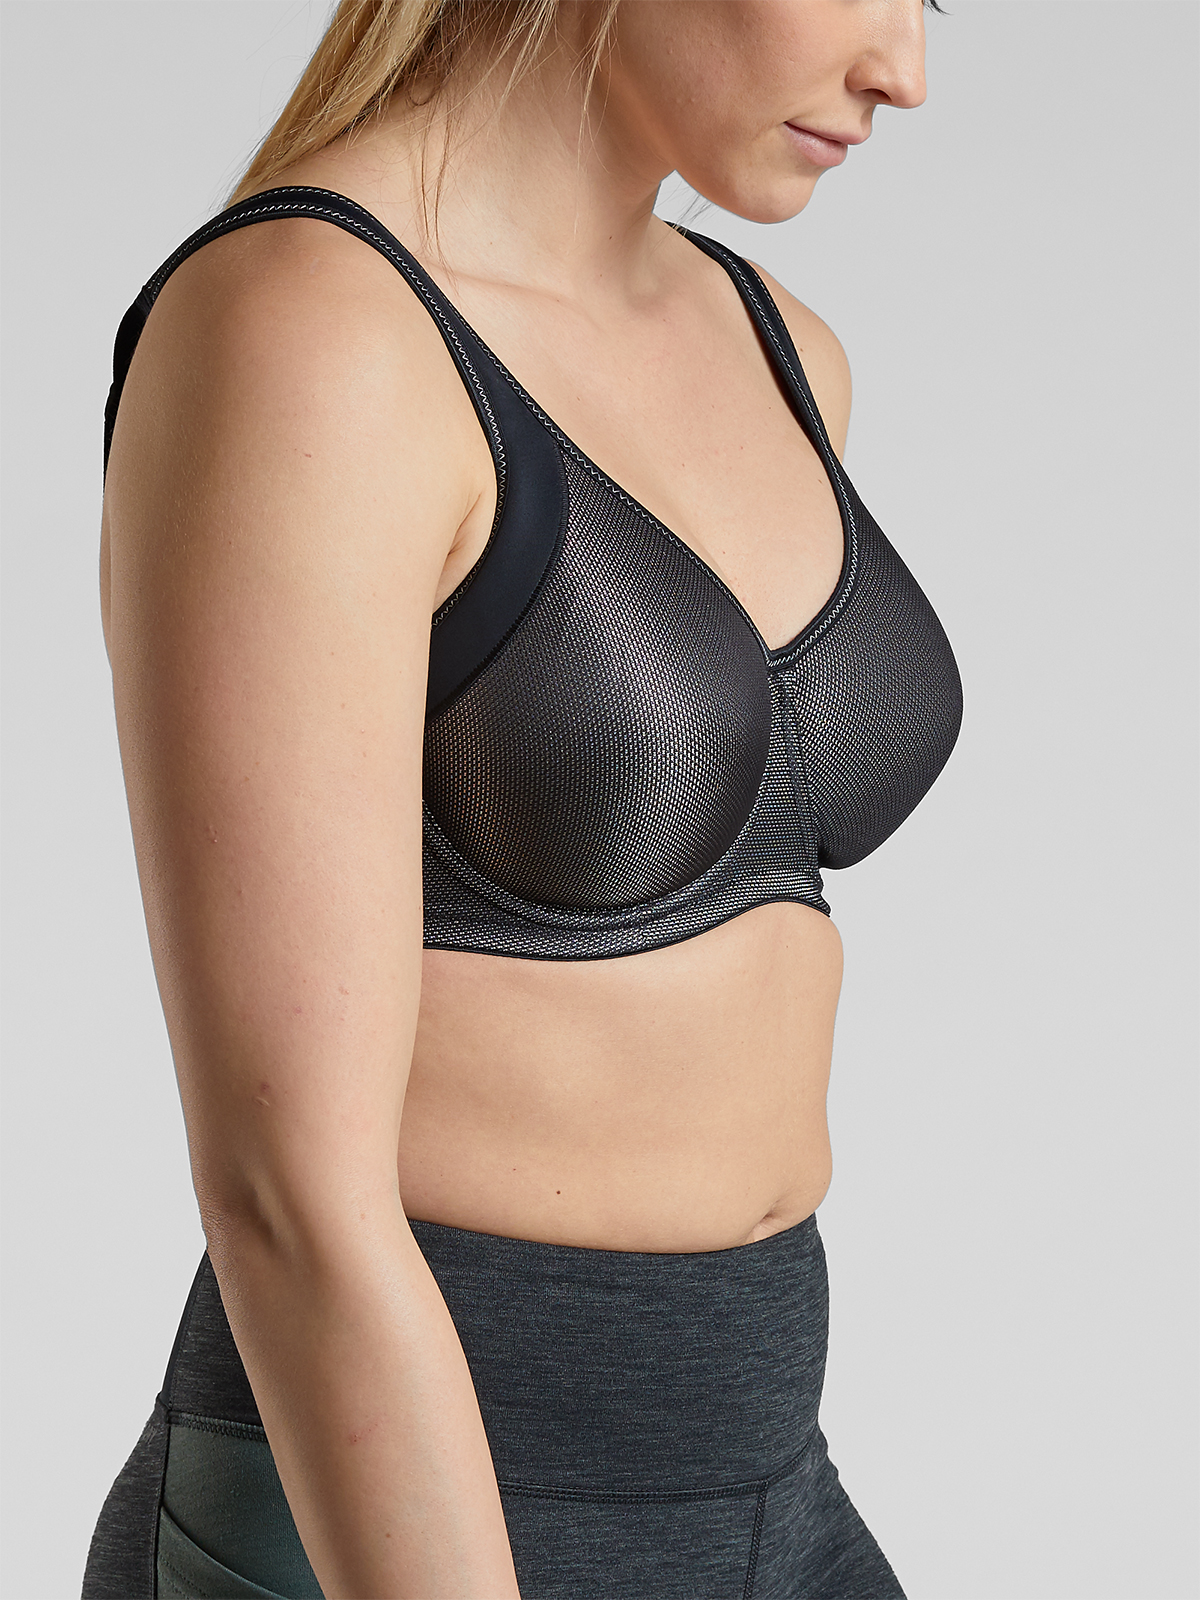 Women's Wire Bras 6-Pack from $19.99 Shipped